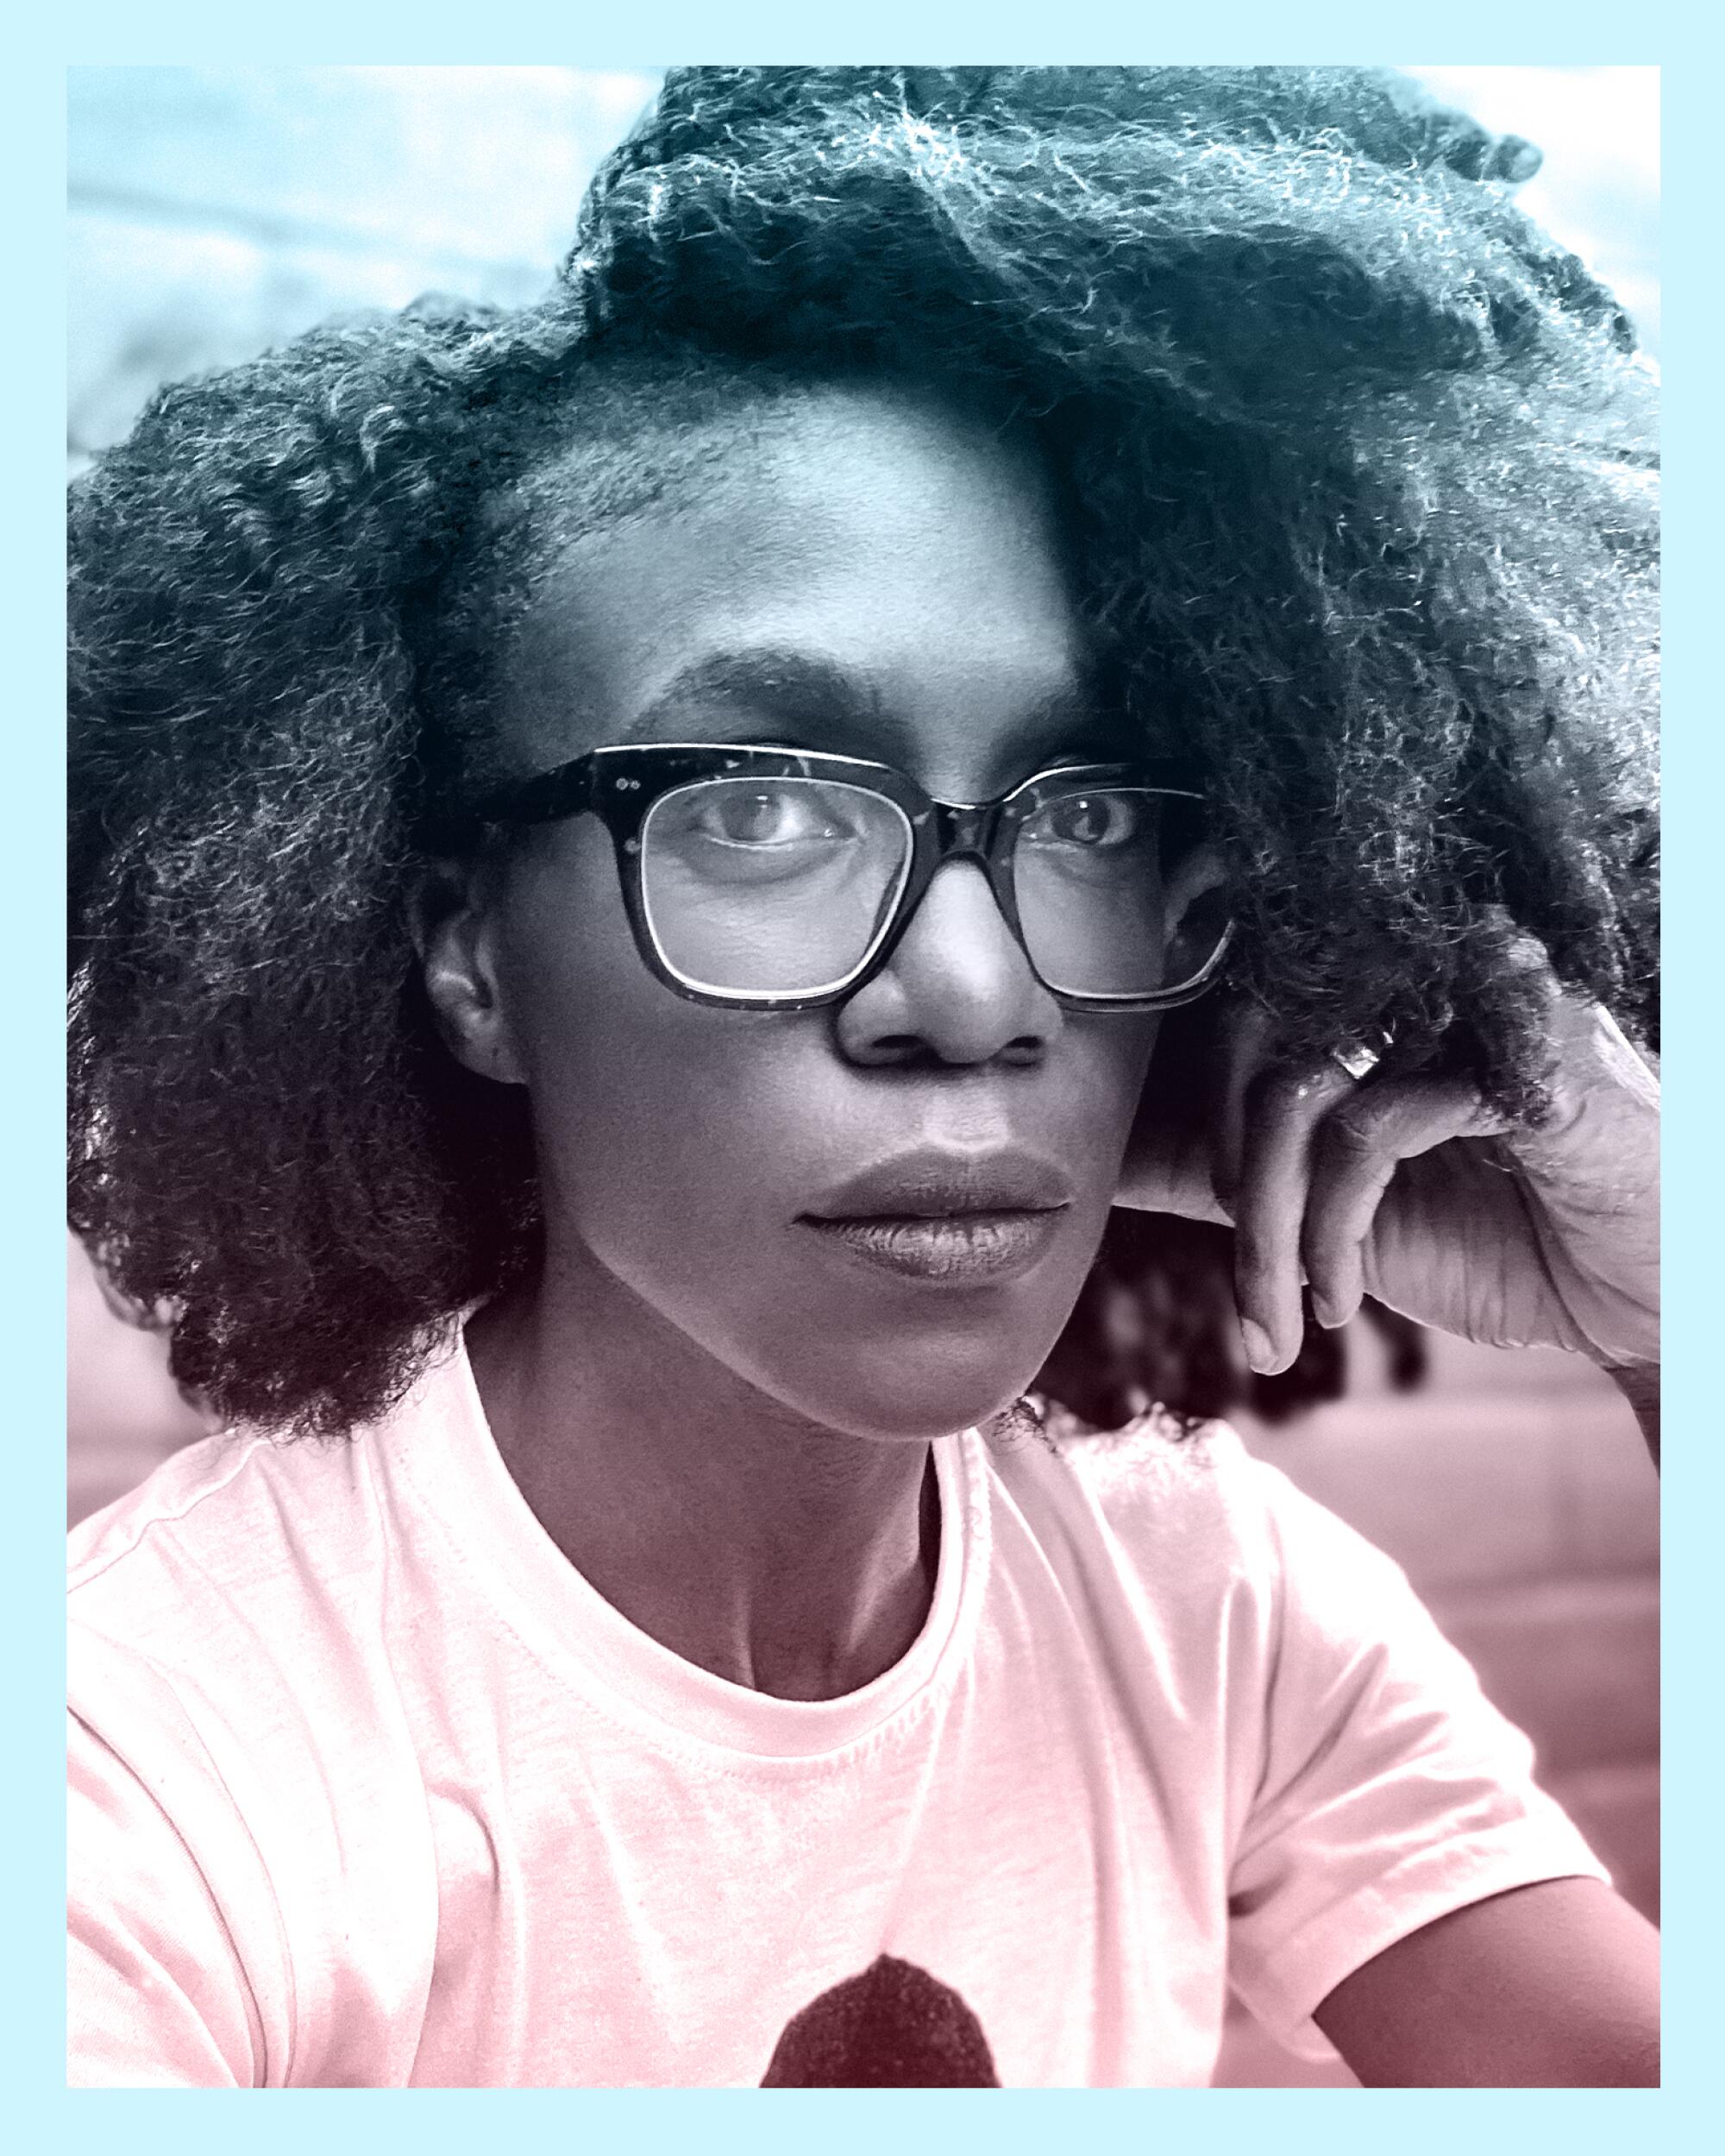 A Black woman with glasses looks intently at the camera.